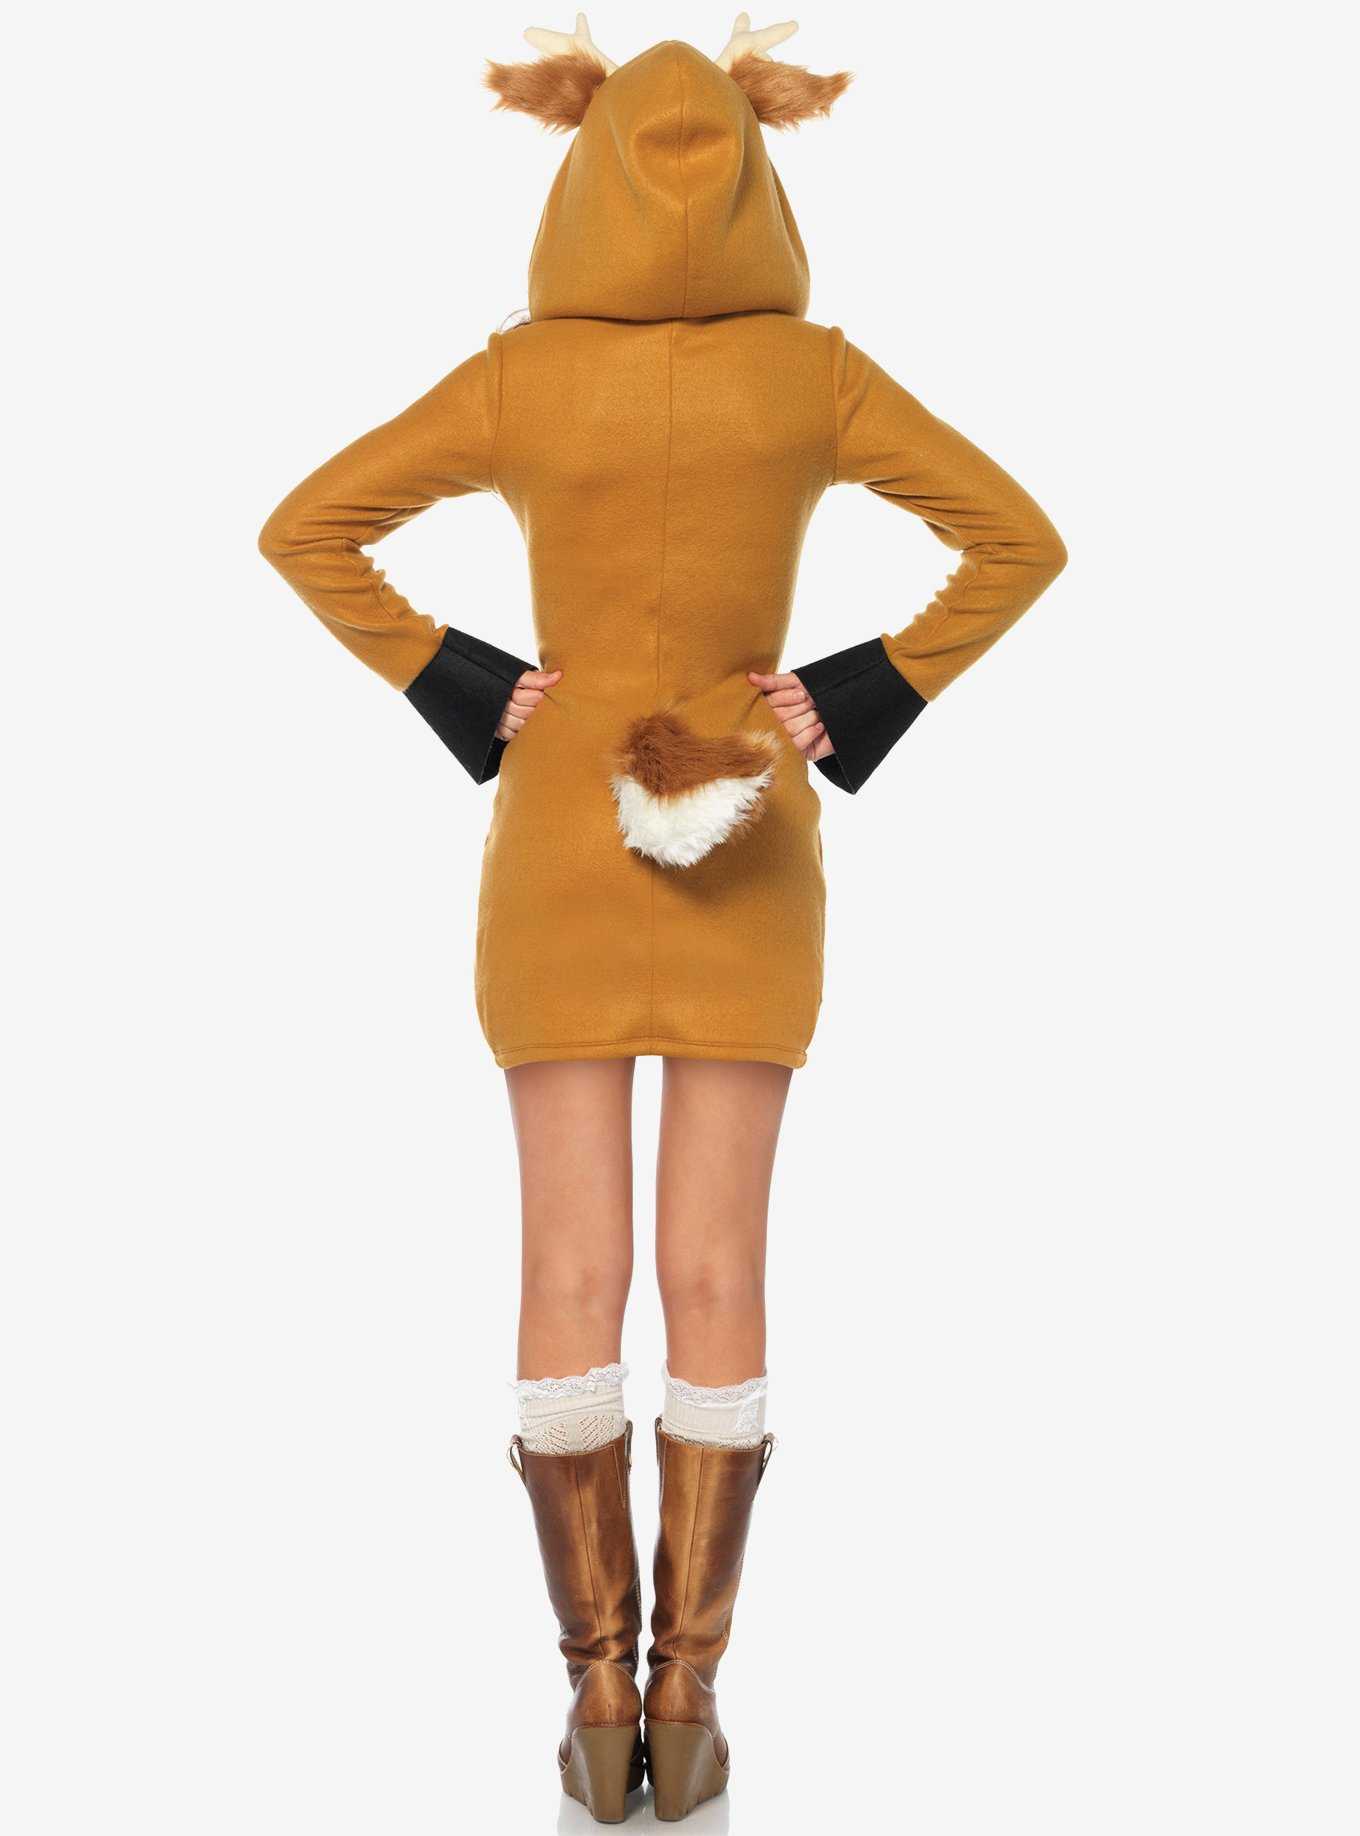 Cozy Fawn Costume Dress with Ear Hood and Fawn Tail, , hi-res